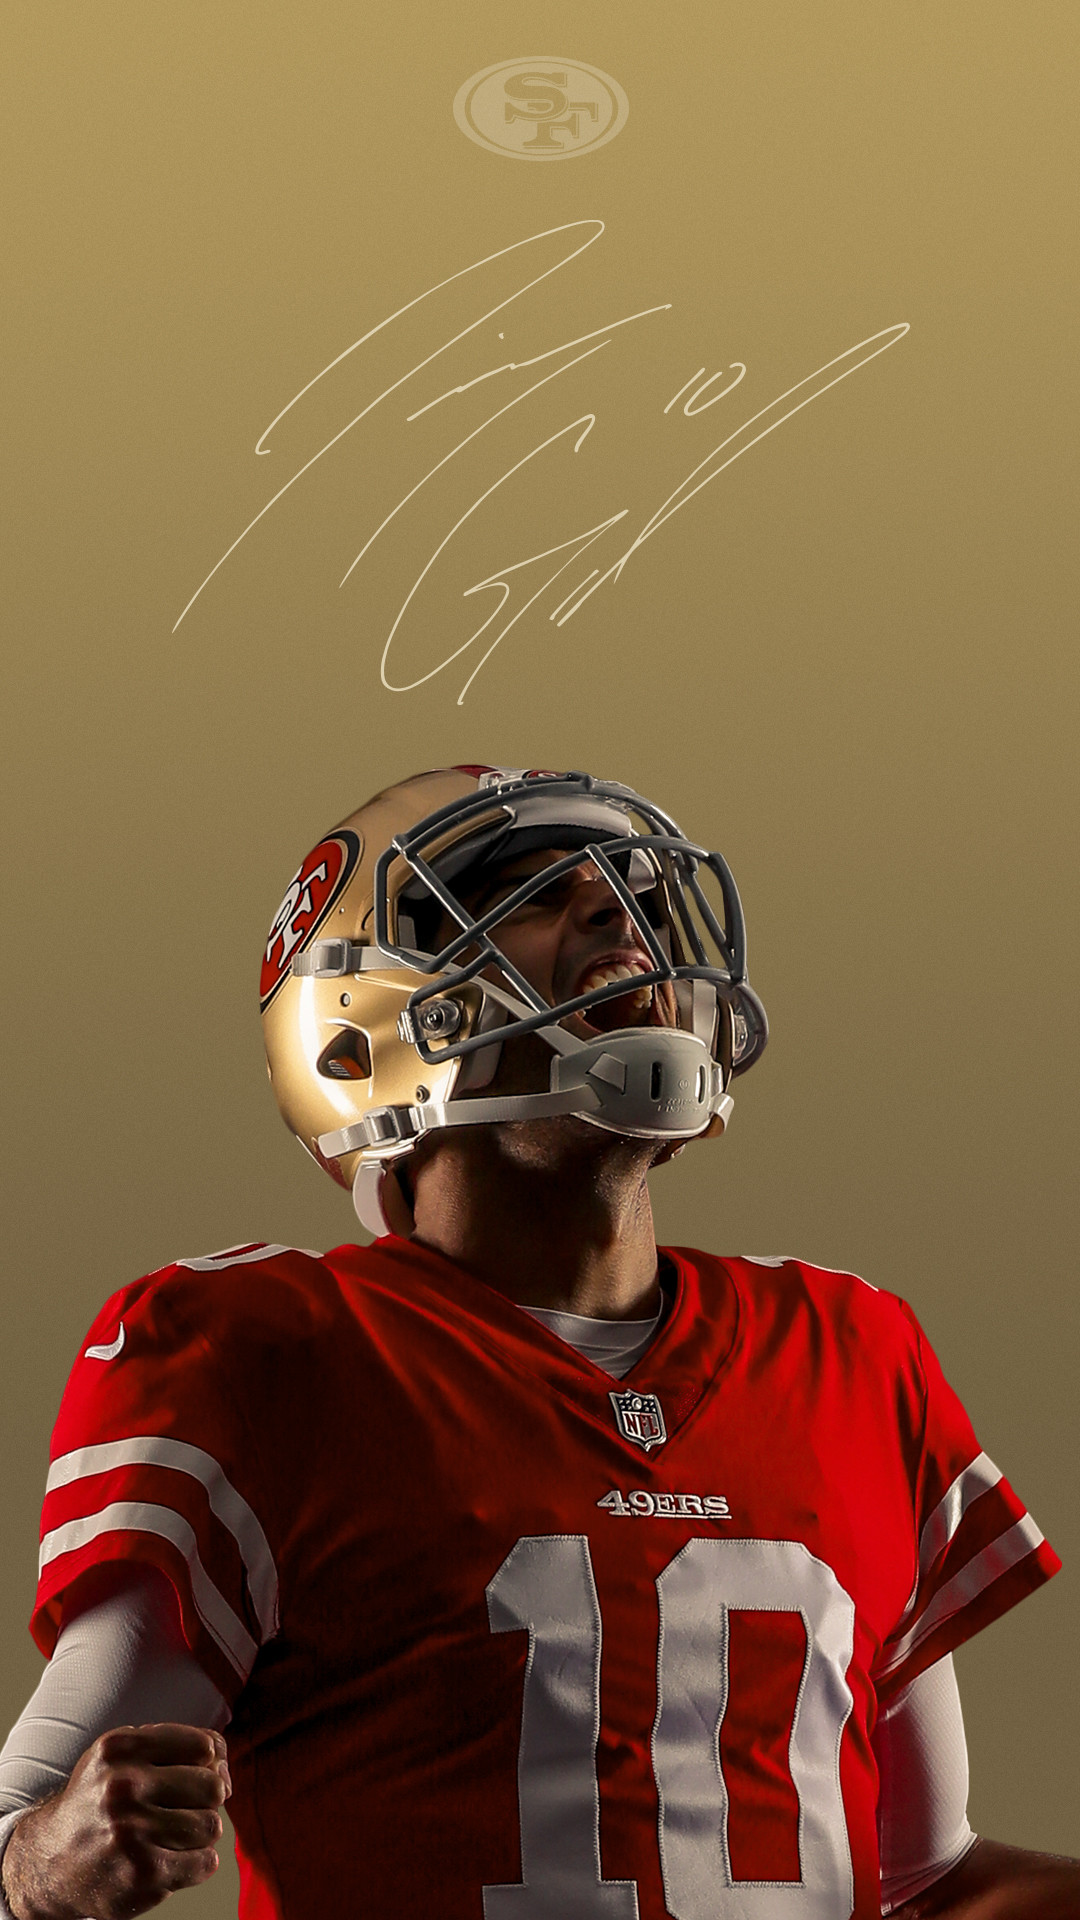 49ers iphone wallpaper,sports gear,helmet,hockey protective equipment,personal protective equipment,player